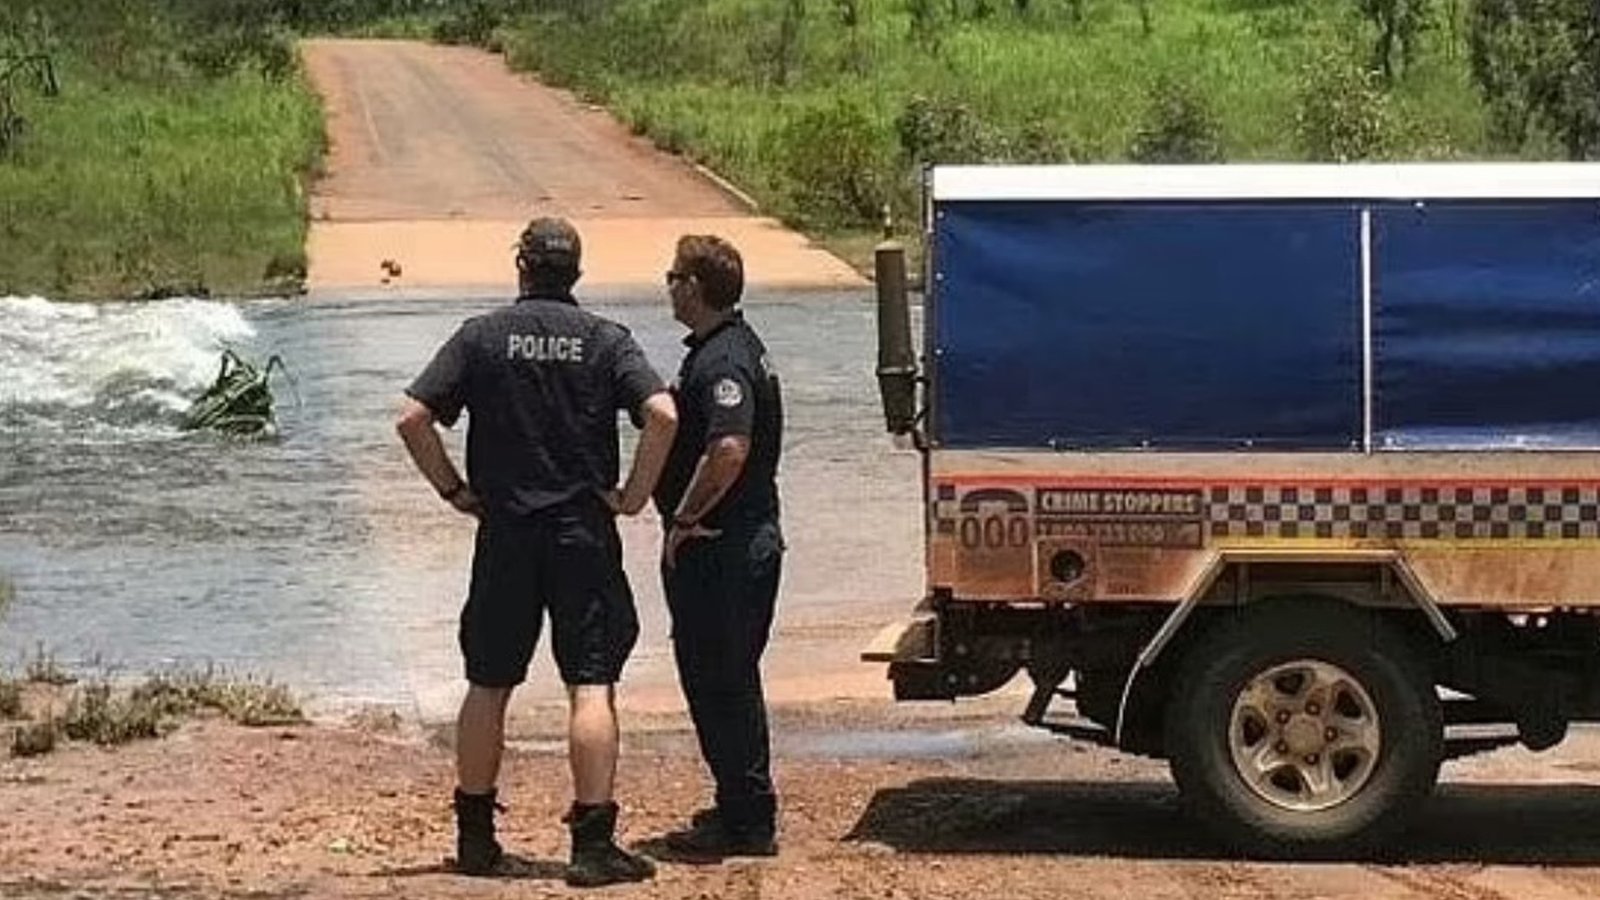 Girl 12 snatched in horror croc attack while swimming in creek as police launch hunt for beast